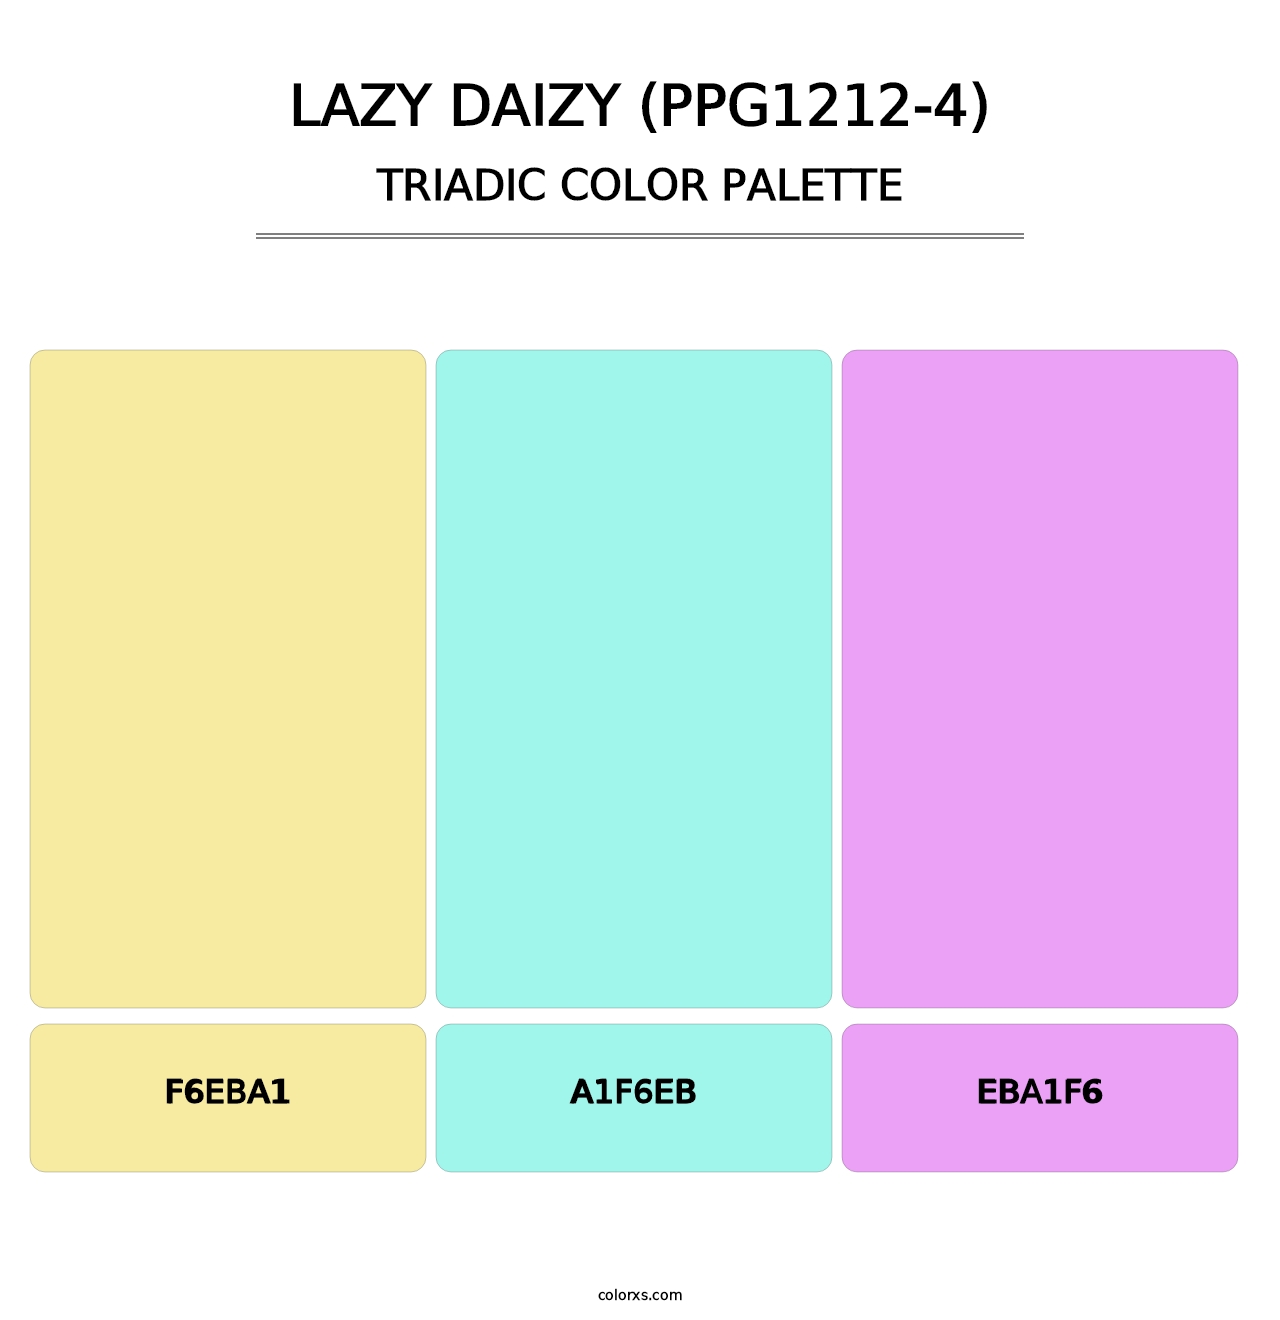 Lazy Daizy (PPG1212-4) - Triadic Color Palette